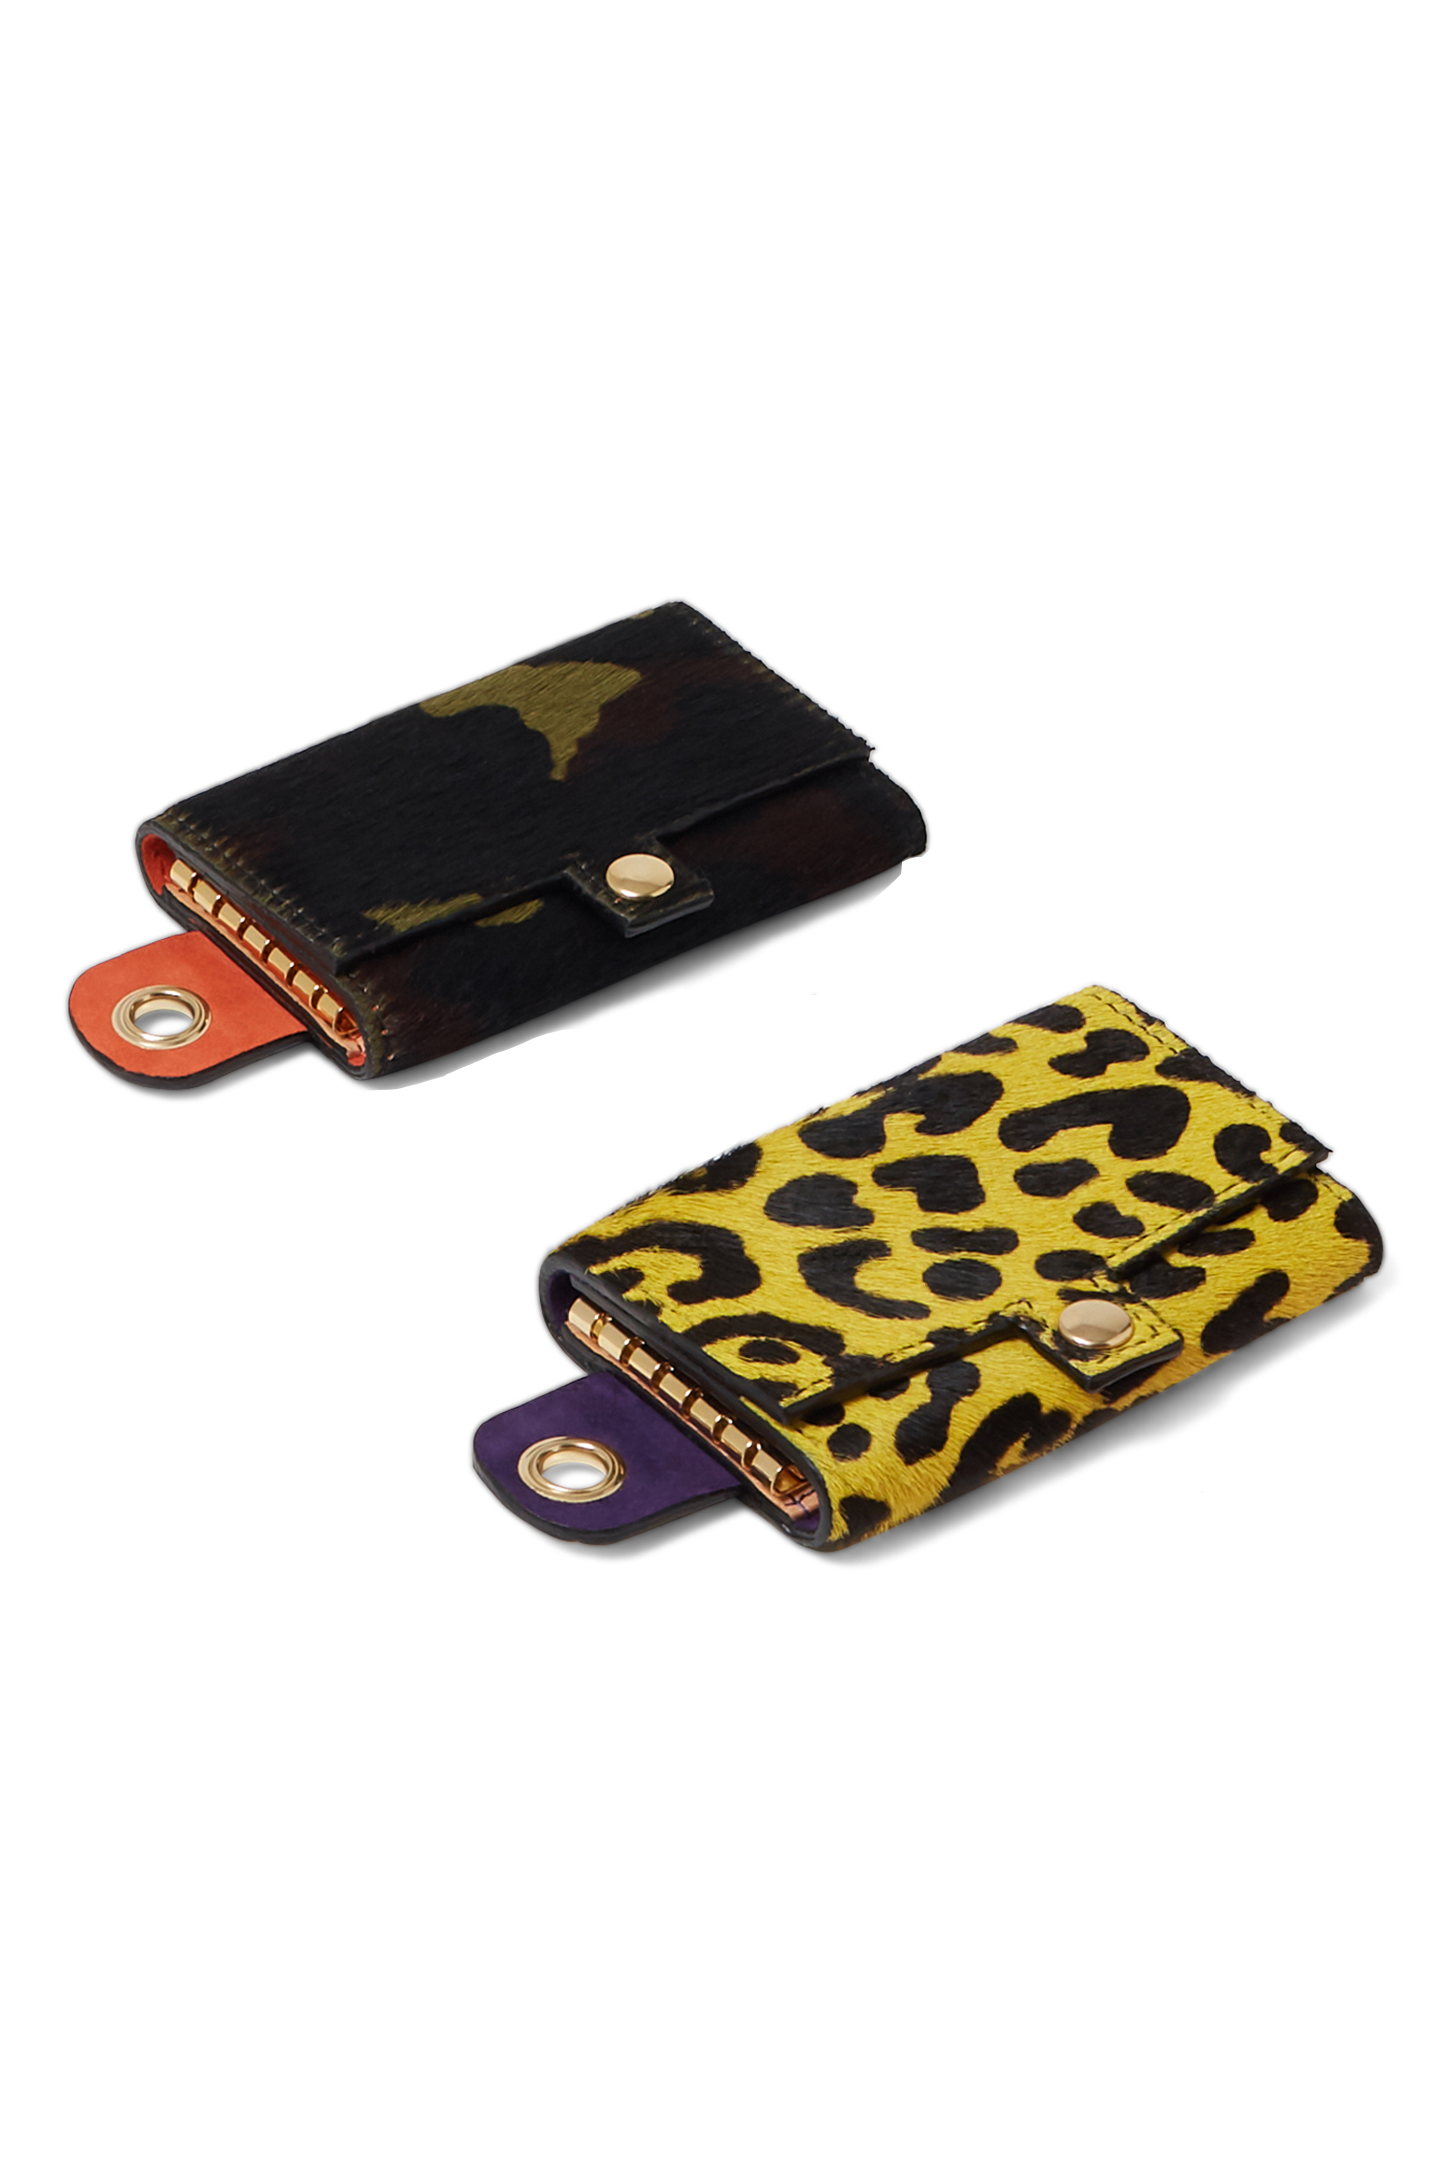 The Minis - 6 Key Holder in yellow Leopard printed leather